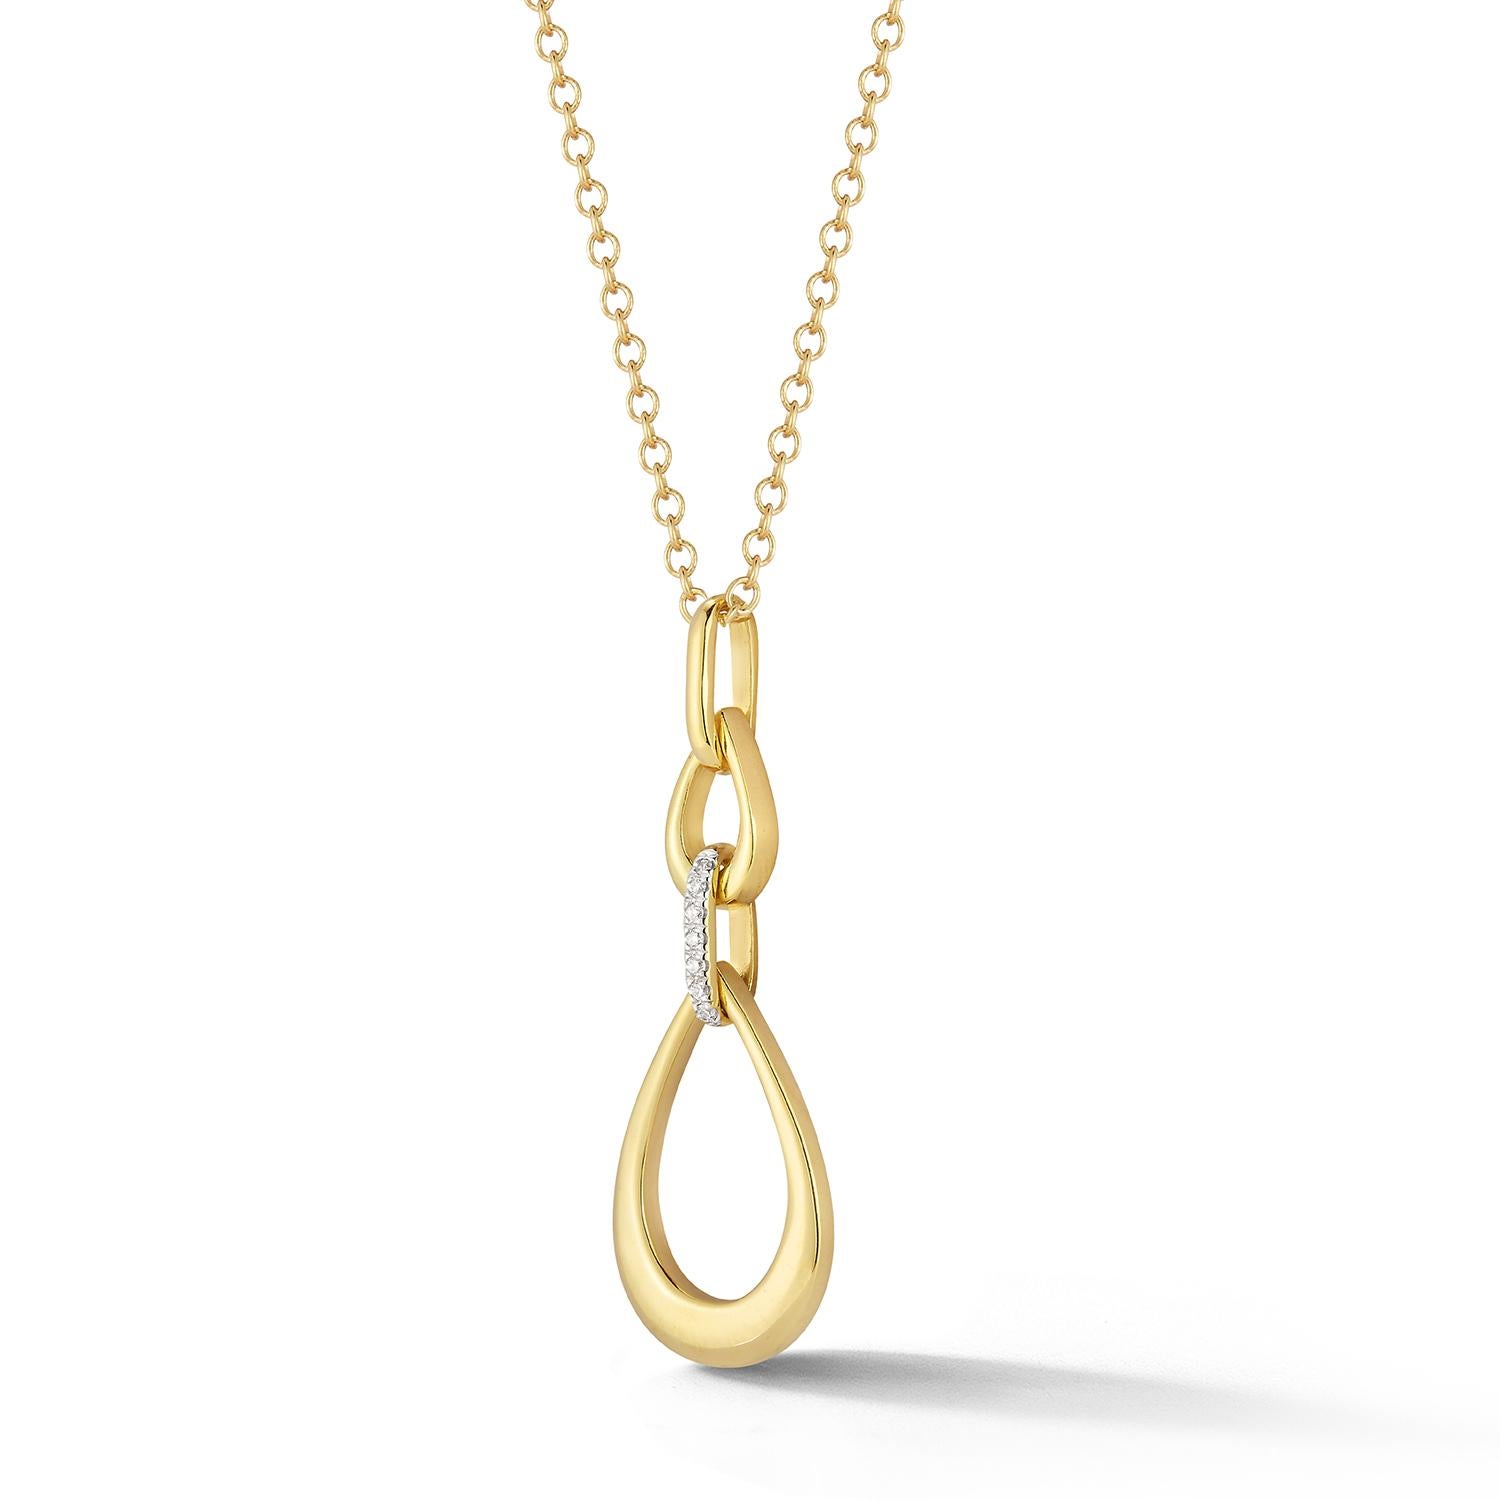 14 Karat Yellow Gold Hand-Crafted High Polish-Finished Graduating Tear Drop Pendant, Accented with 0.07 Carats of a Pave Set Diamond Connecting Bar, Sliding on a 16